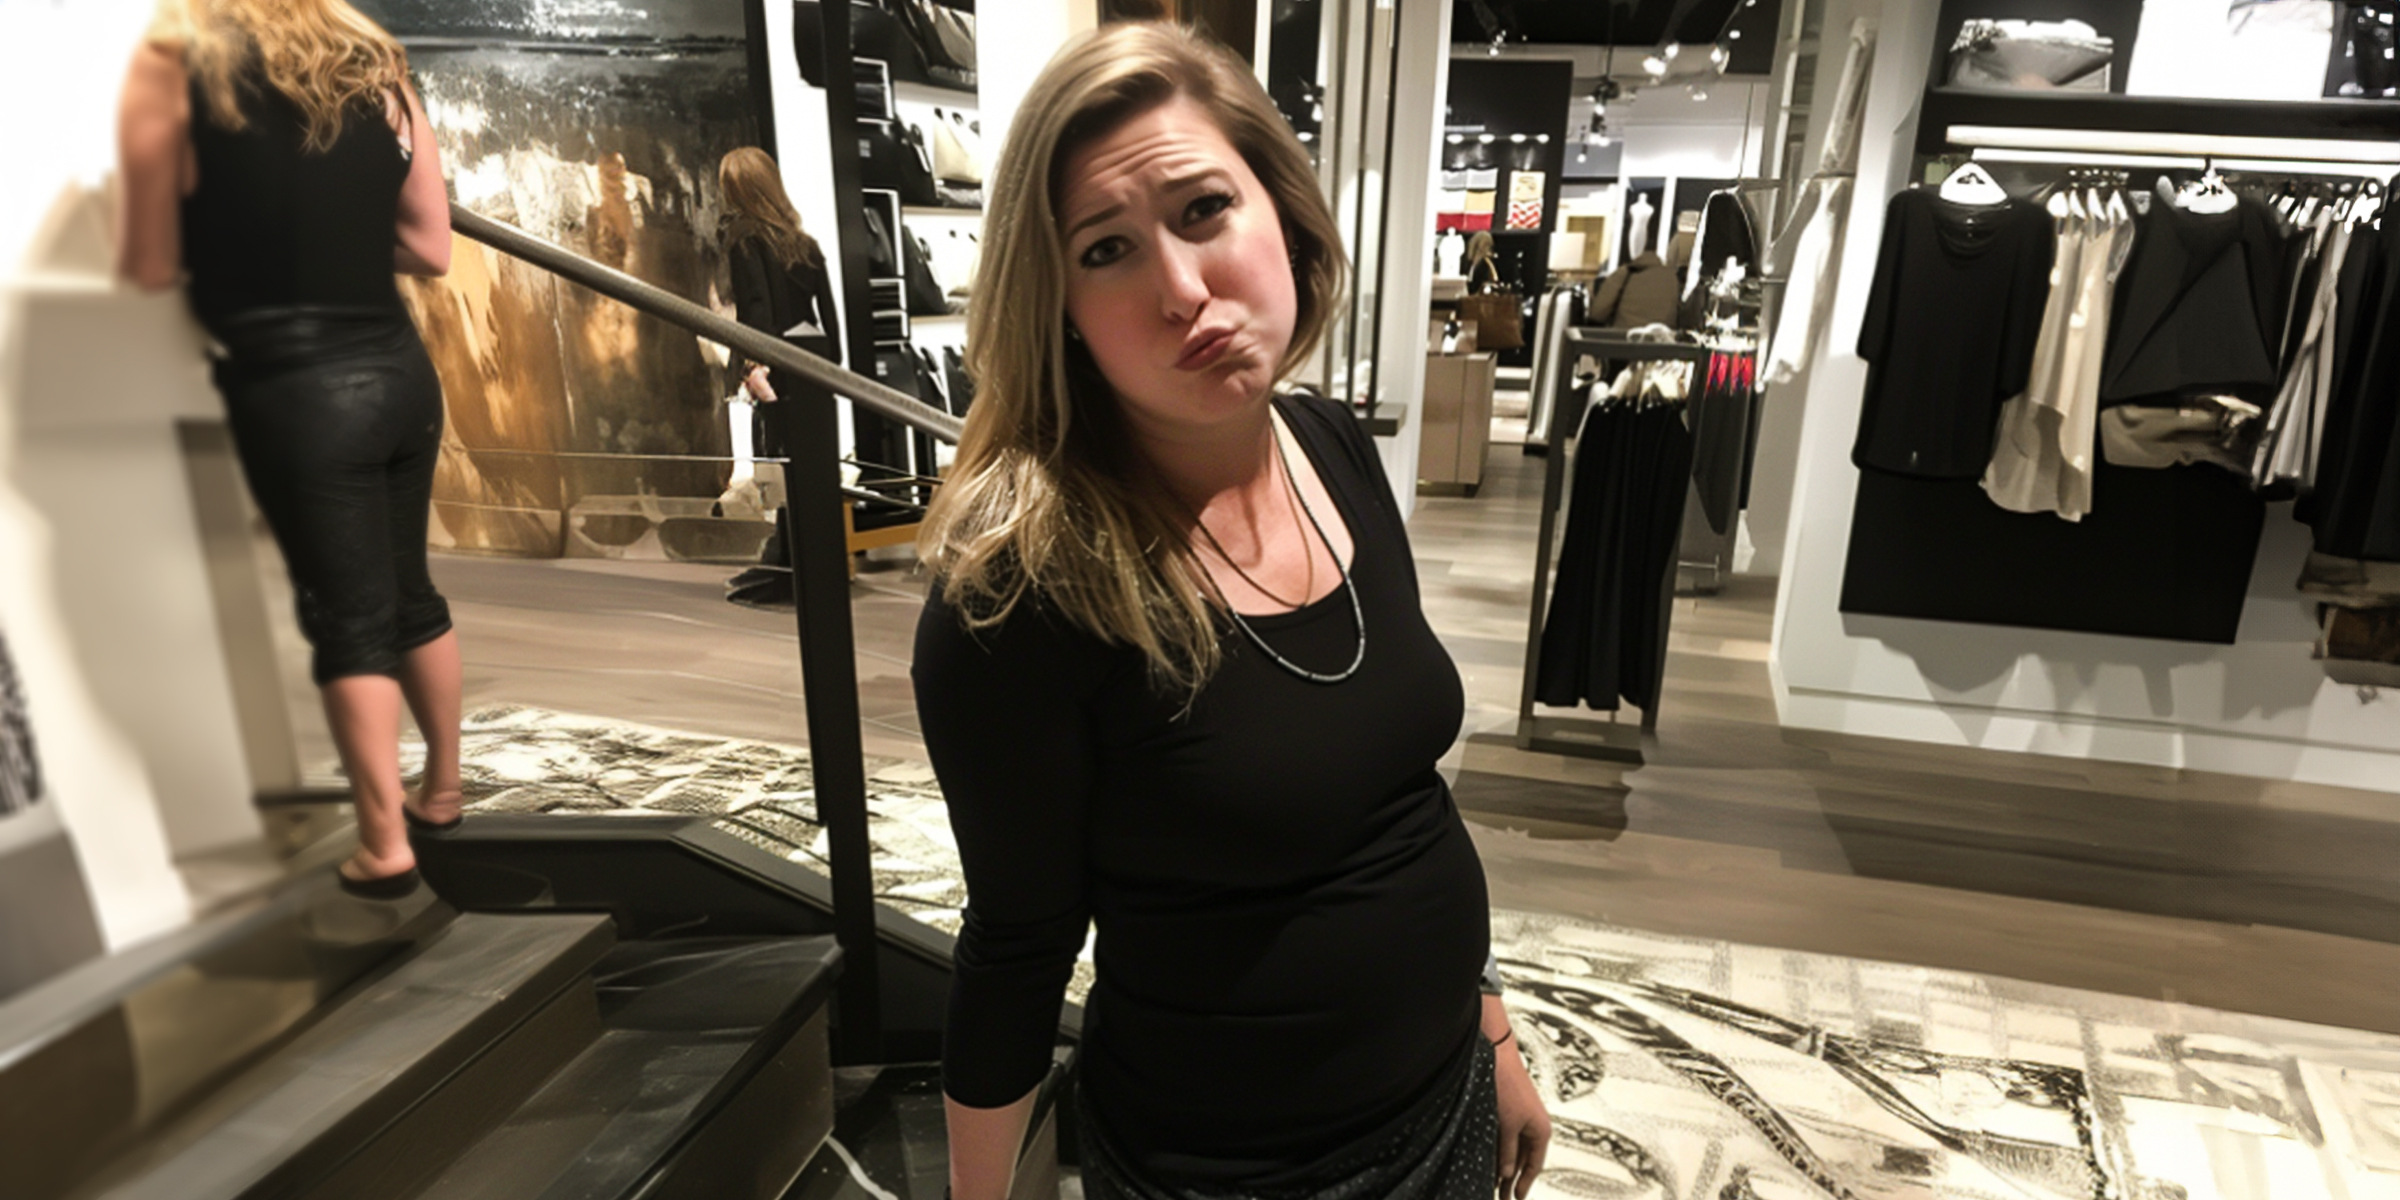 A woman in a clothing store expressing pity | Source: Amomama